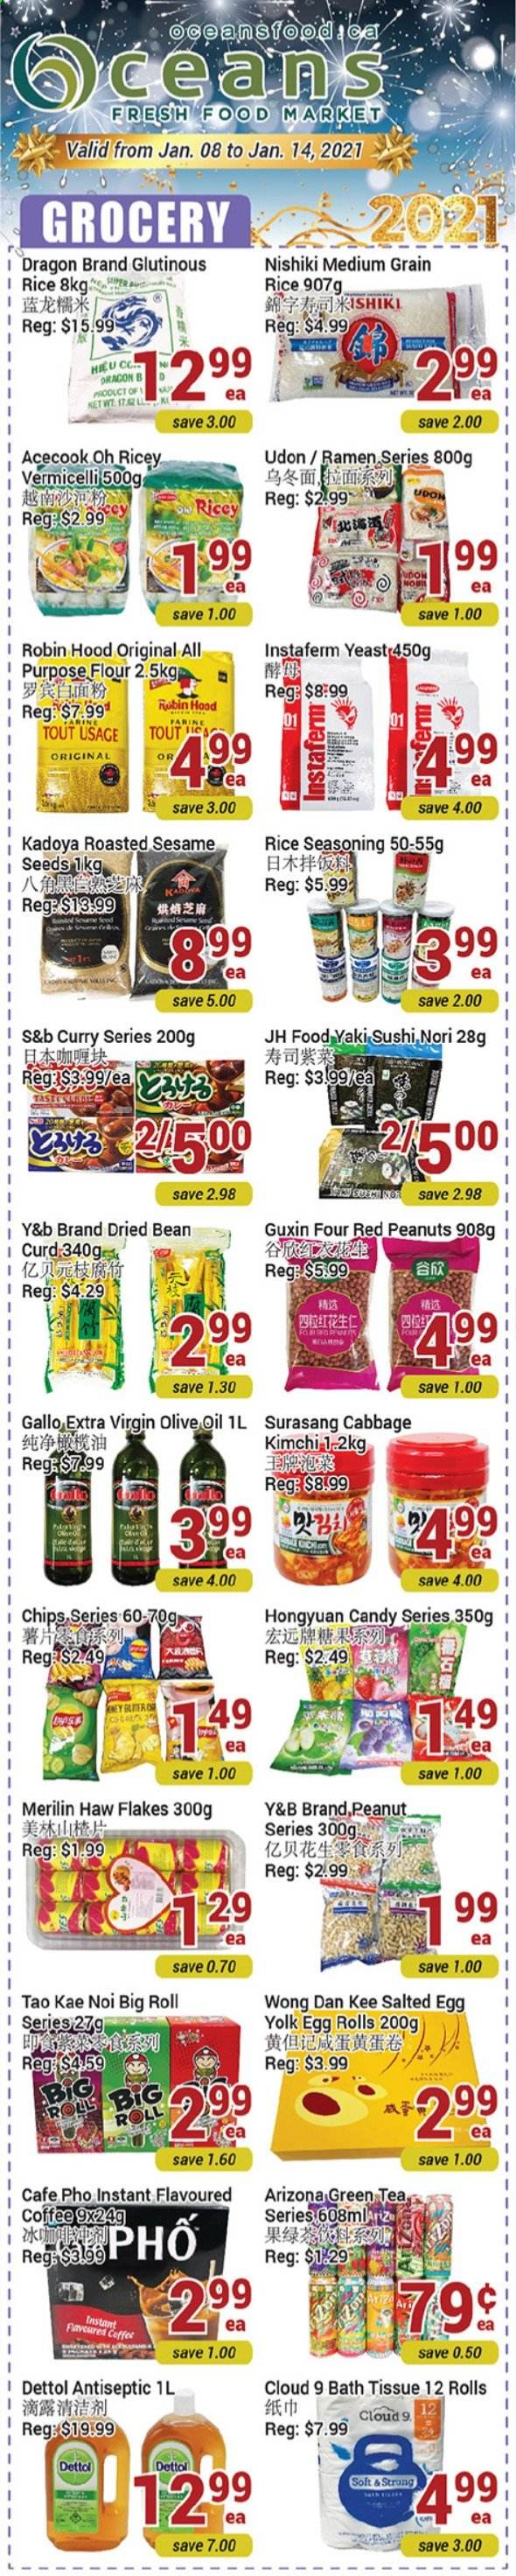 thumbnail - Oceans Flyer - January 08, 2021 - January 14, 2021 - Sales products - cabbage, ramen, egg rolls, curd, yeast, Cloud 9, salted egg, flour, rice, medium grain rice, spice, extra virgin olive oil, olive oil, oil, peanuts, AriZona, green tea, tea, coffee, bath tissue, chips, Dettol. Page 1.